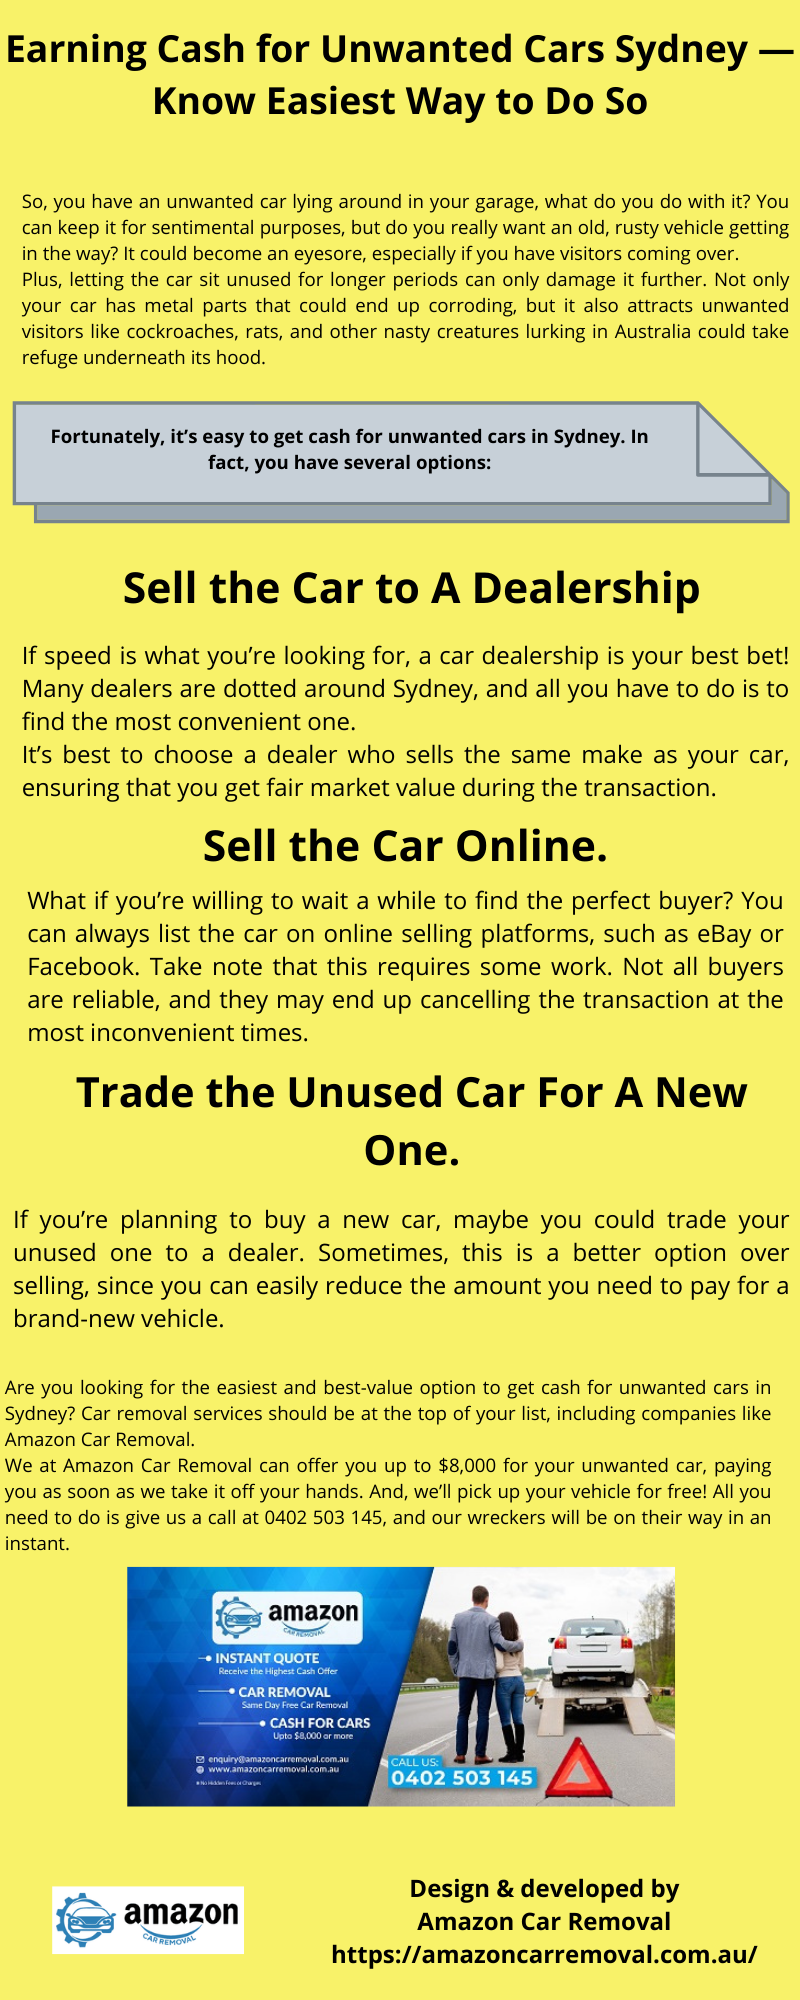 Earning Cash for Unwanted Cars Sydney — Know Easiest Way to Do So.png  by amazoncarremoval